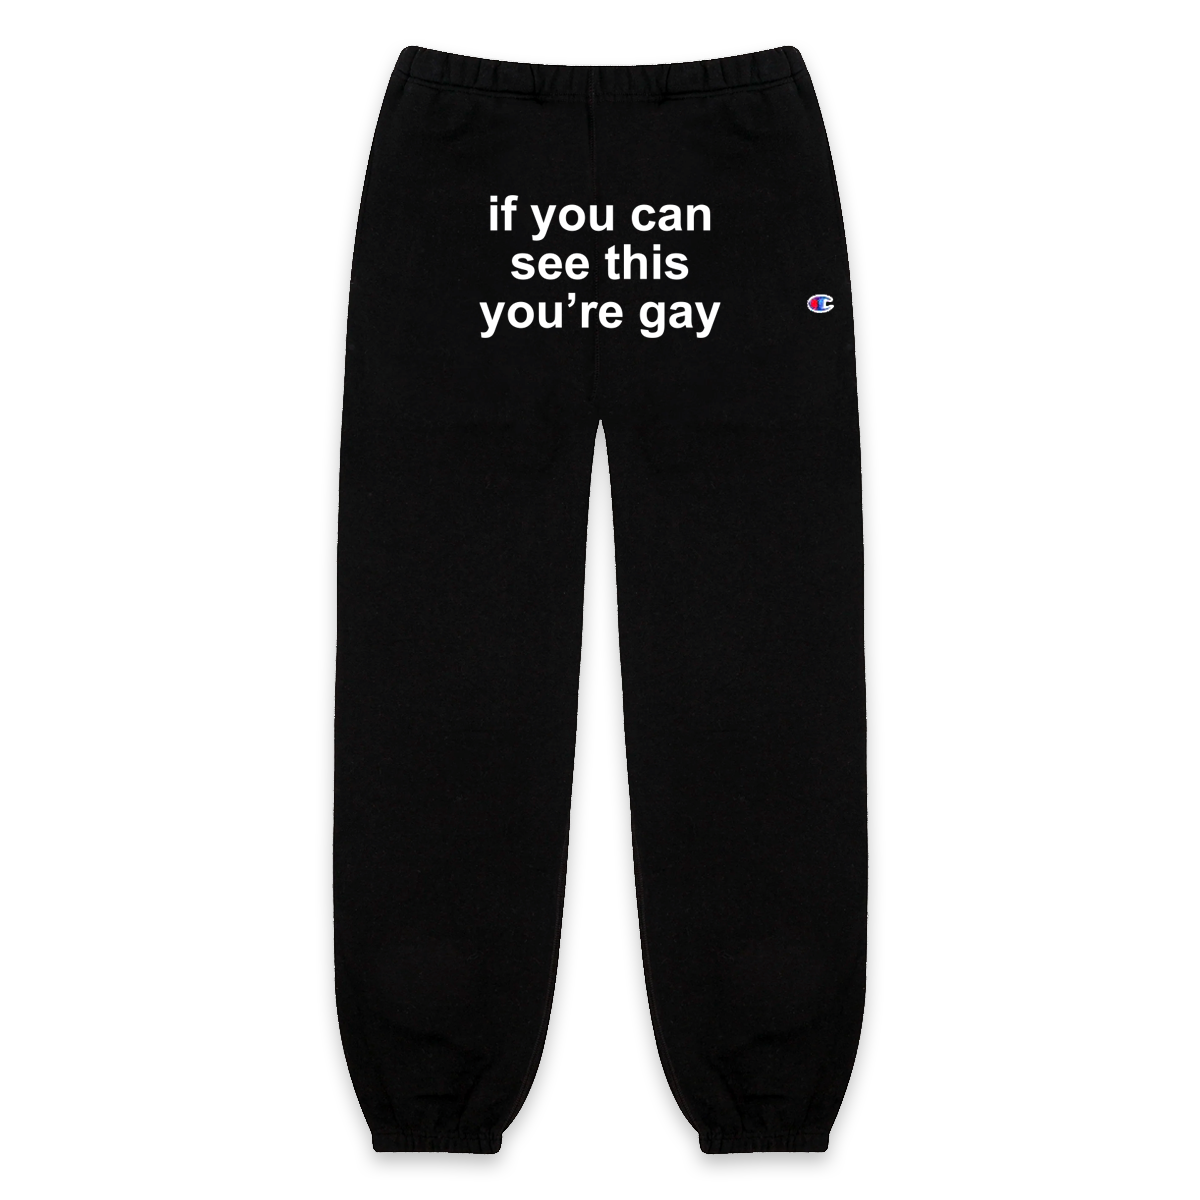 If You Can See This You're Gay Sweatpants (Black)